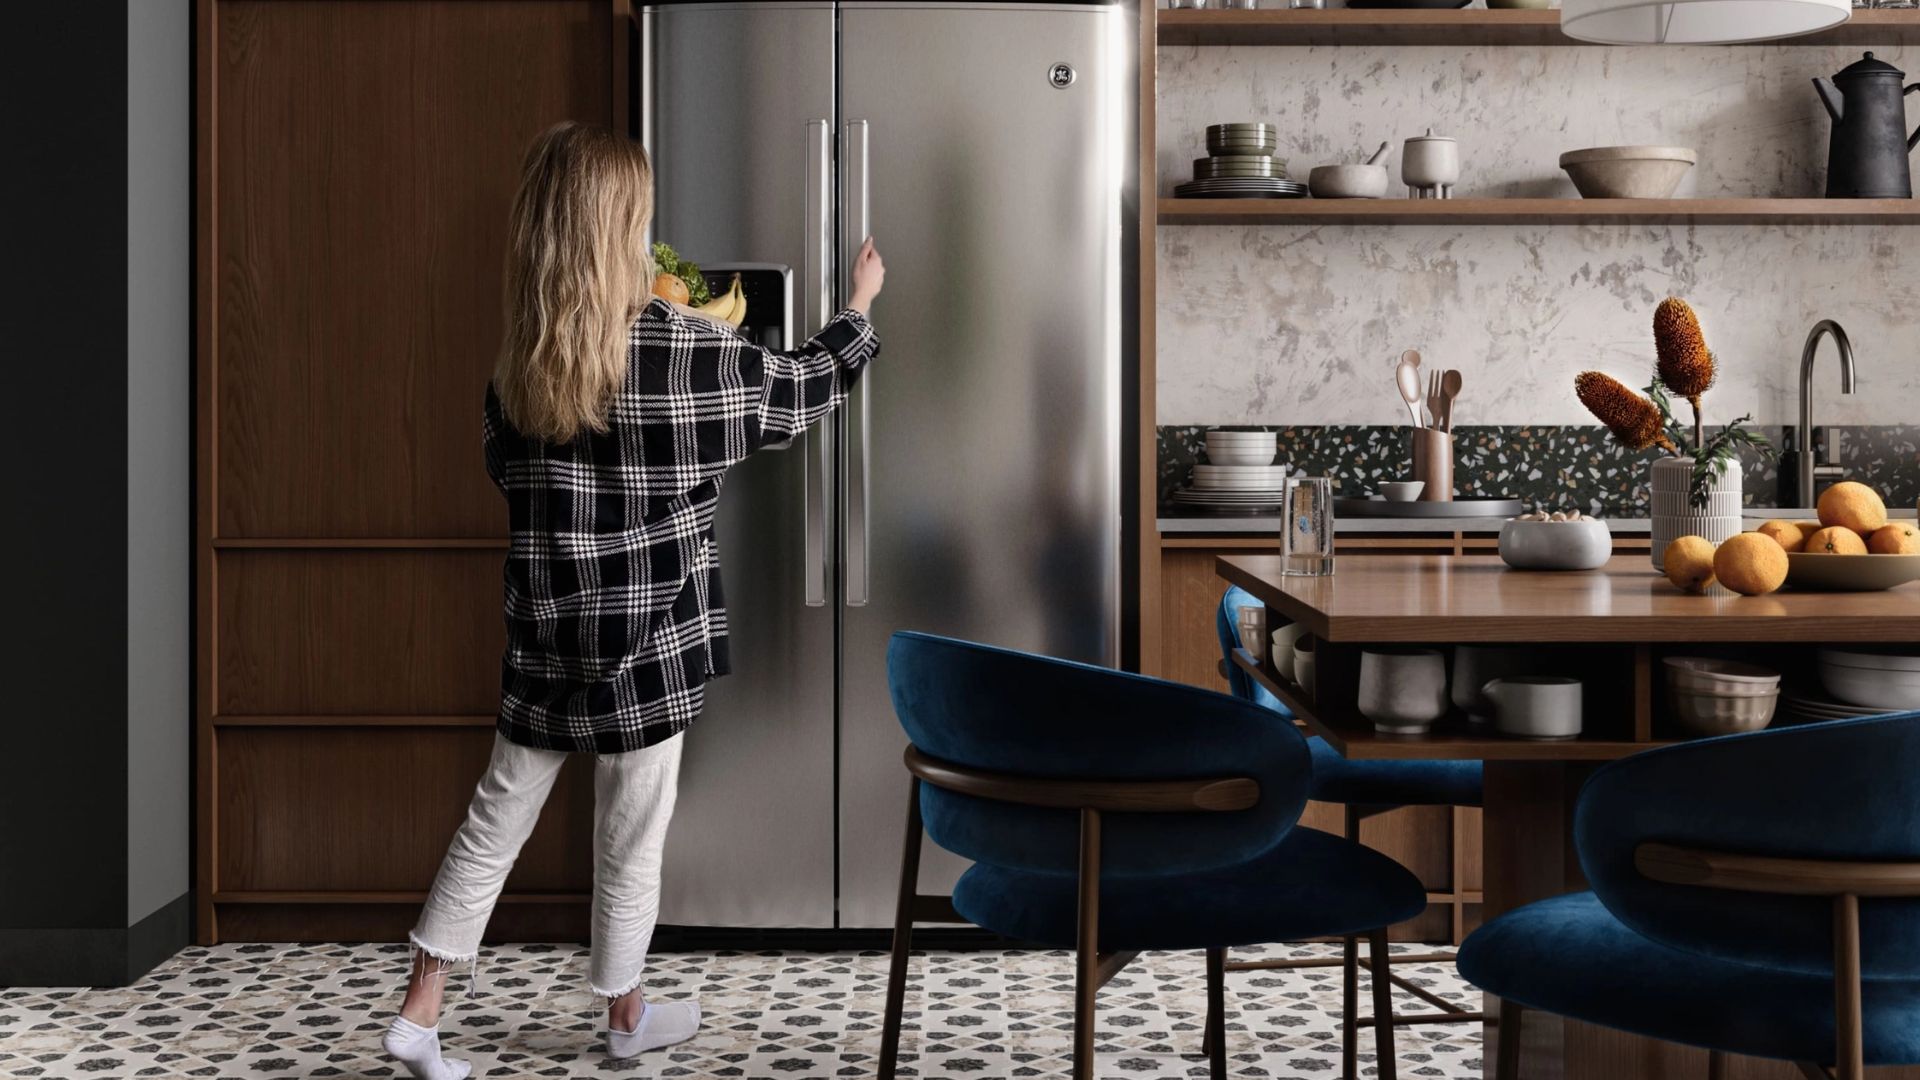 Scale Lifestyle Shot for Home Appliances